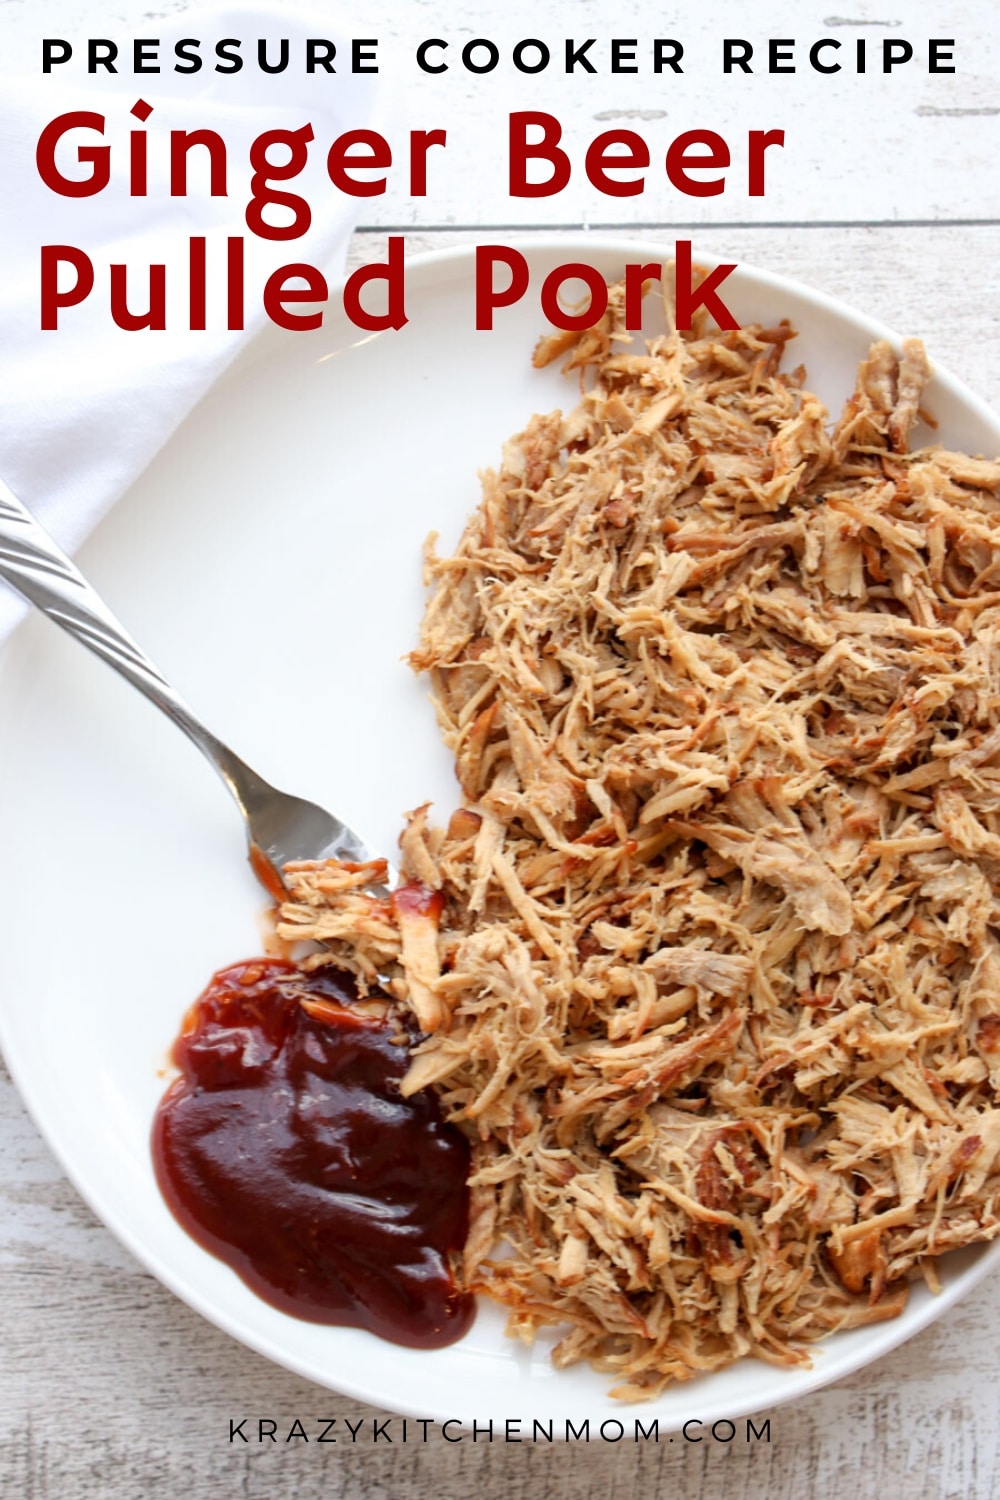 Pressure Cooker Ginger Beer Pulled Pork is easy, convenient, quick and delicious. It's moist and has a sweet and subtle ginger taste from the ginger beer.  via @krazykitchenmom